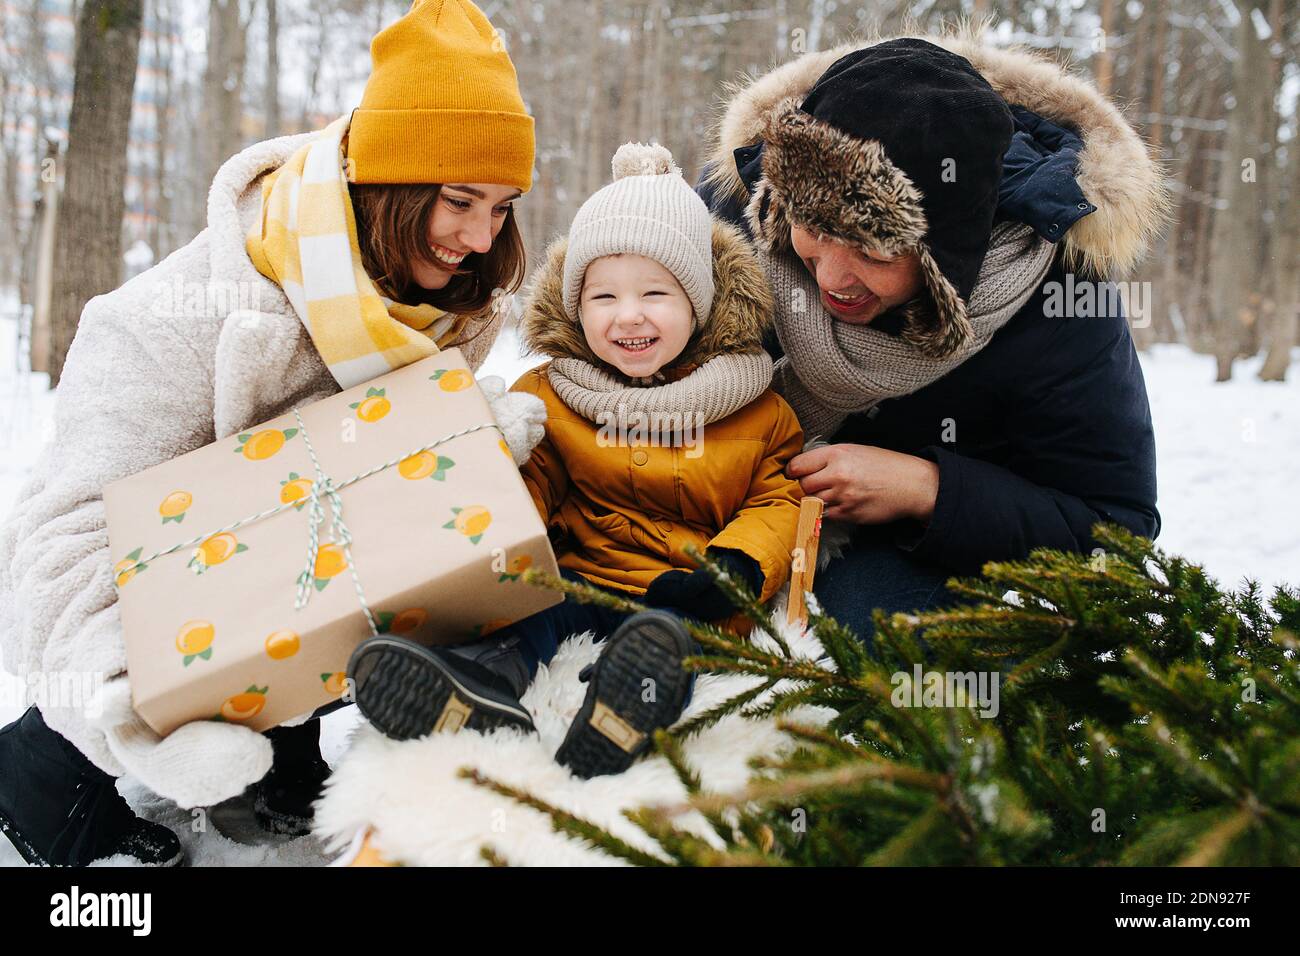 Family in the winter forest, a parent next to a toddler in a sleigh Stock Photo